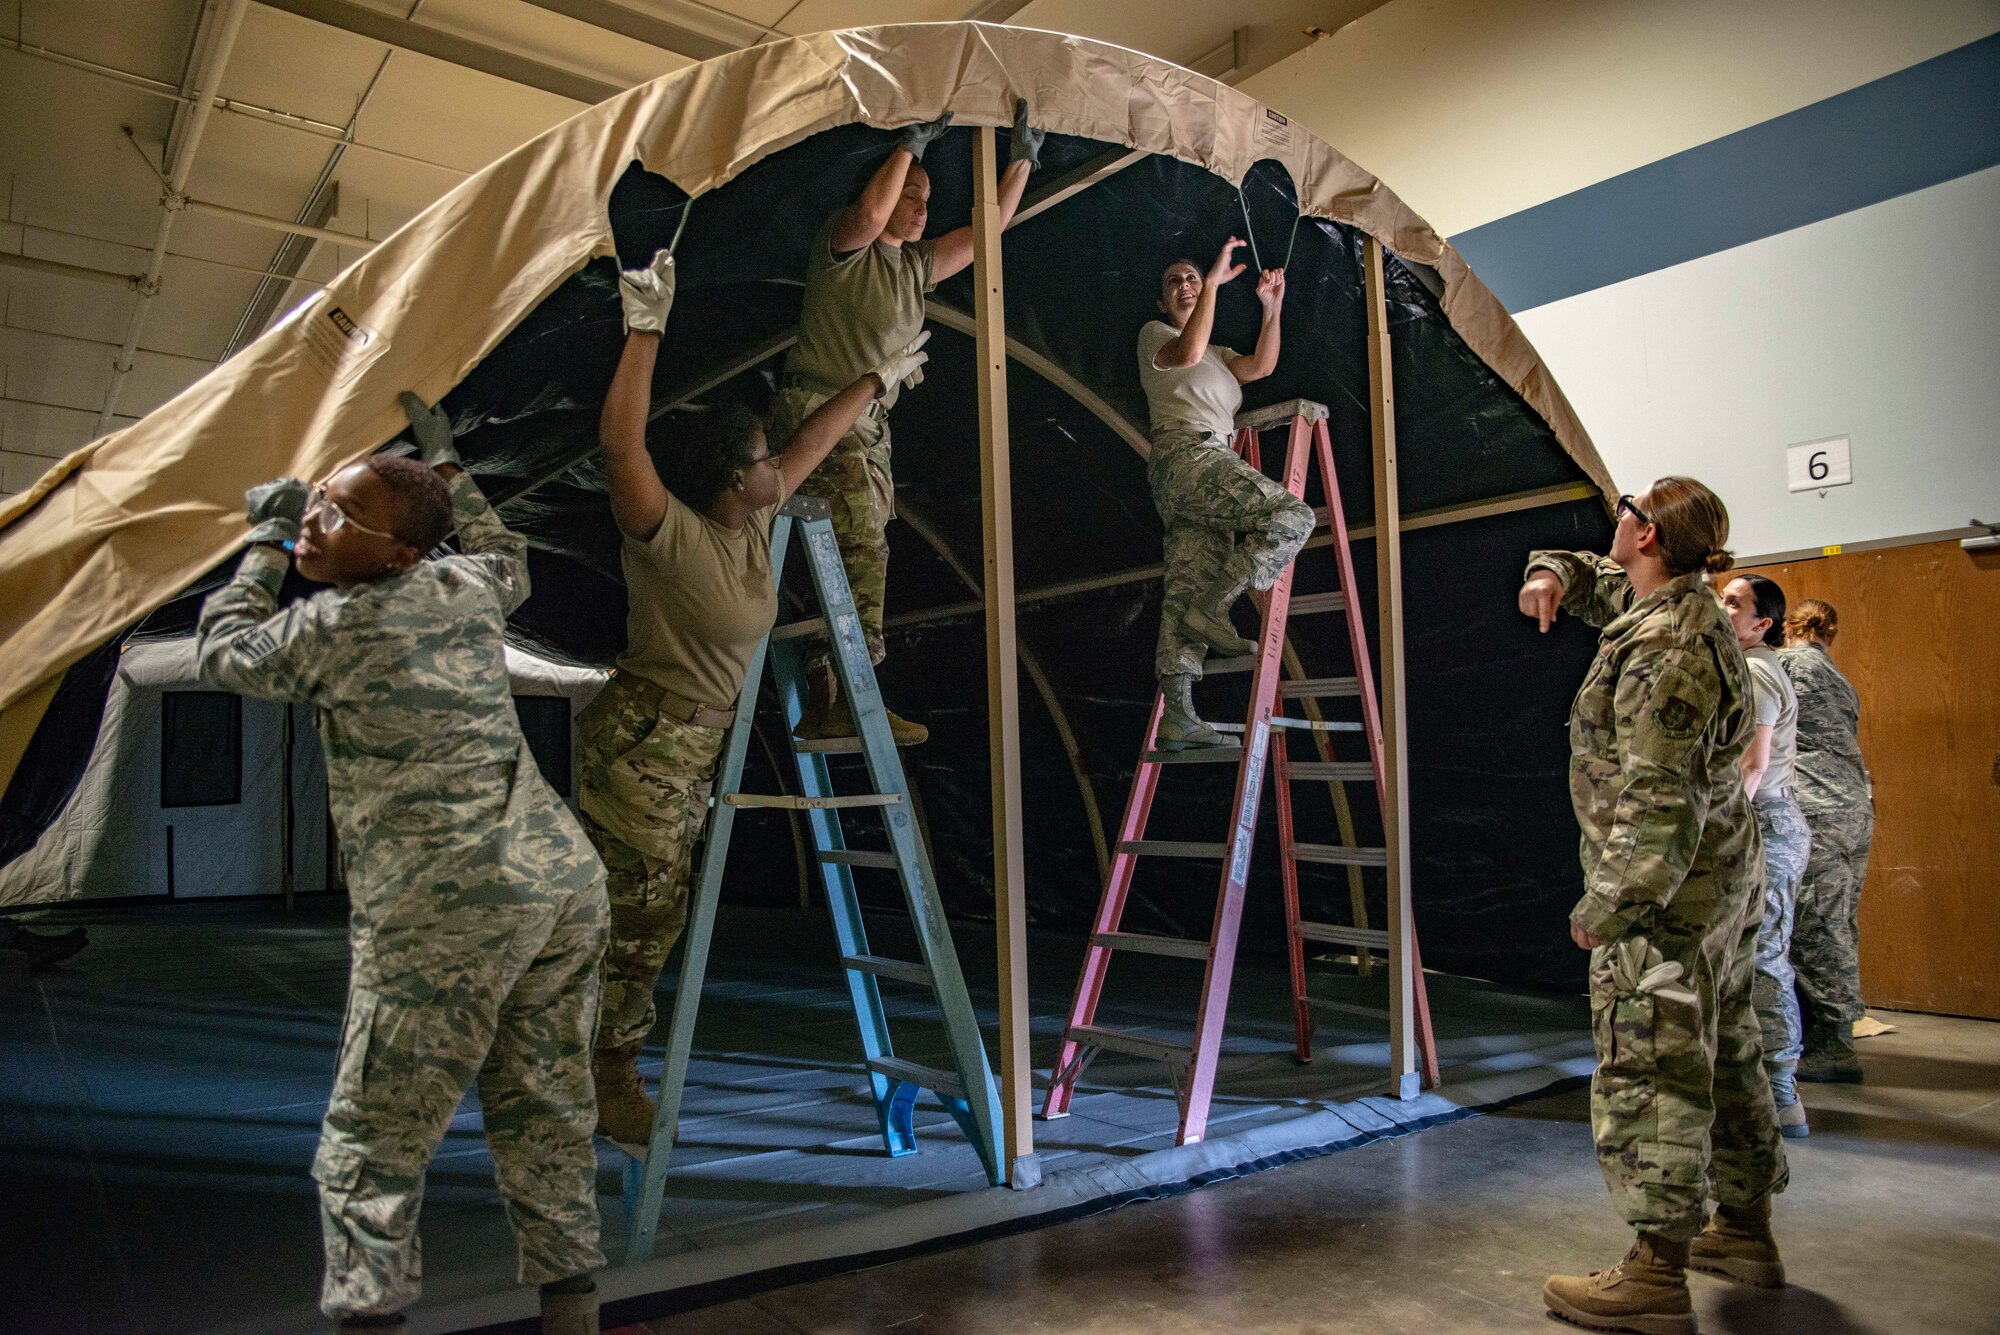 913th Force Support Squadron practices tent build operations at Little Rock Air Force Base, Ark, Oct. 6, 2019. The ability to properly prepare and build a tent is essential for deployment or humanitarian environments. FSS provides the Air Force a range of services, from quality of life programs to combat support operations. (U.S. Air Force Reserve photo by Senior Airman Chase Cannon)